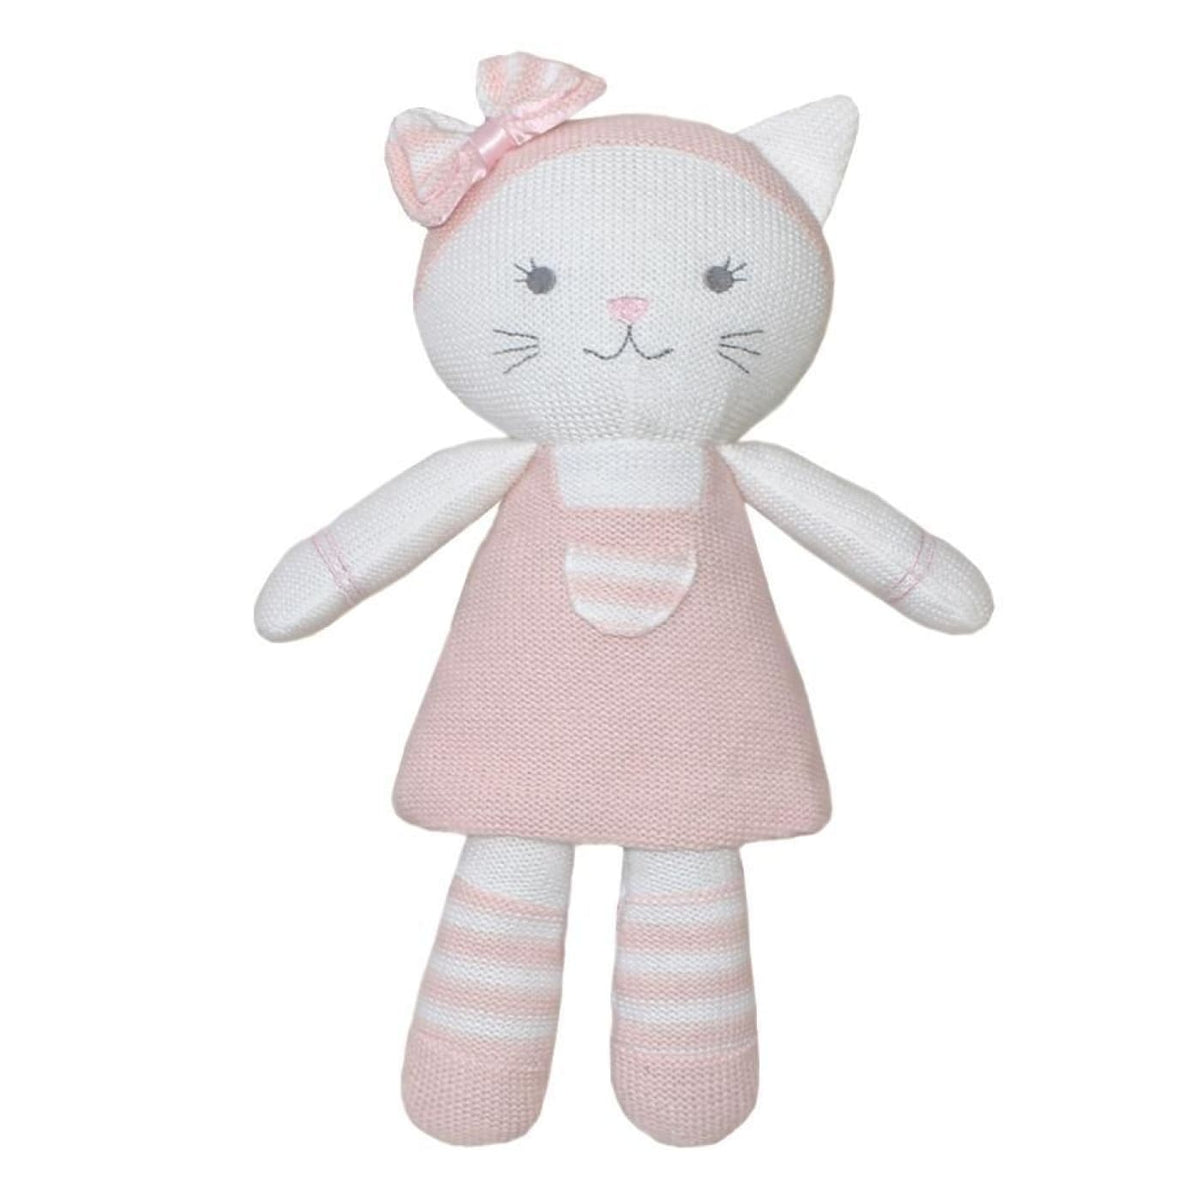 Living Textiles Softie Toy Character - Daisy The Cat - TOYS &amp; PLAY - PLUSH TOYS